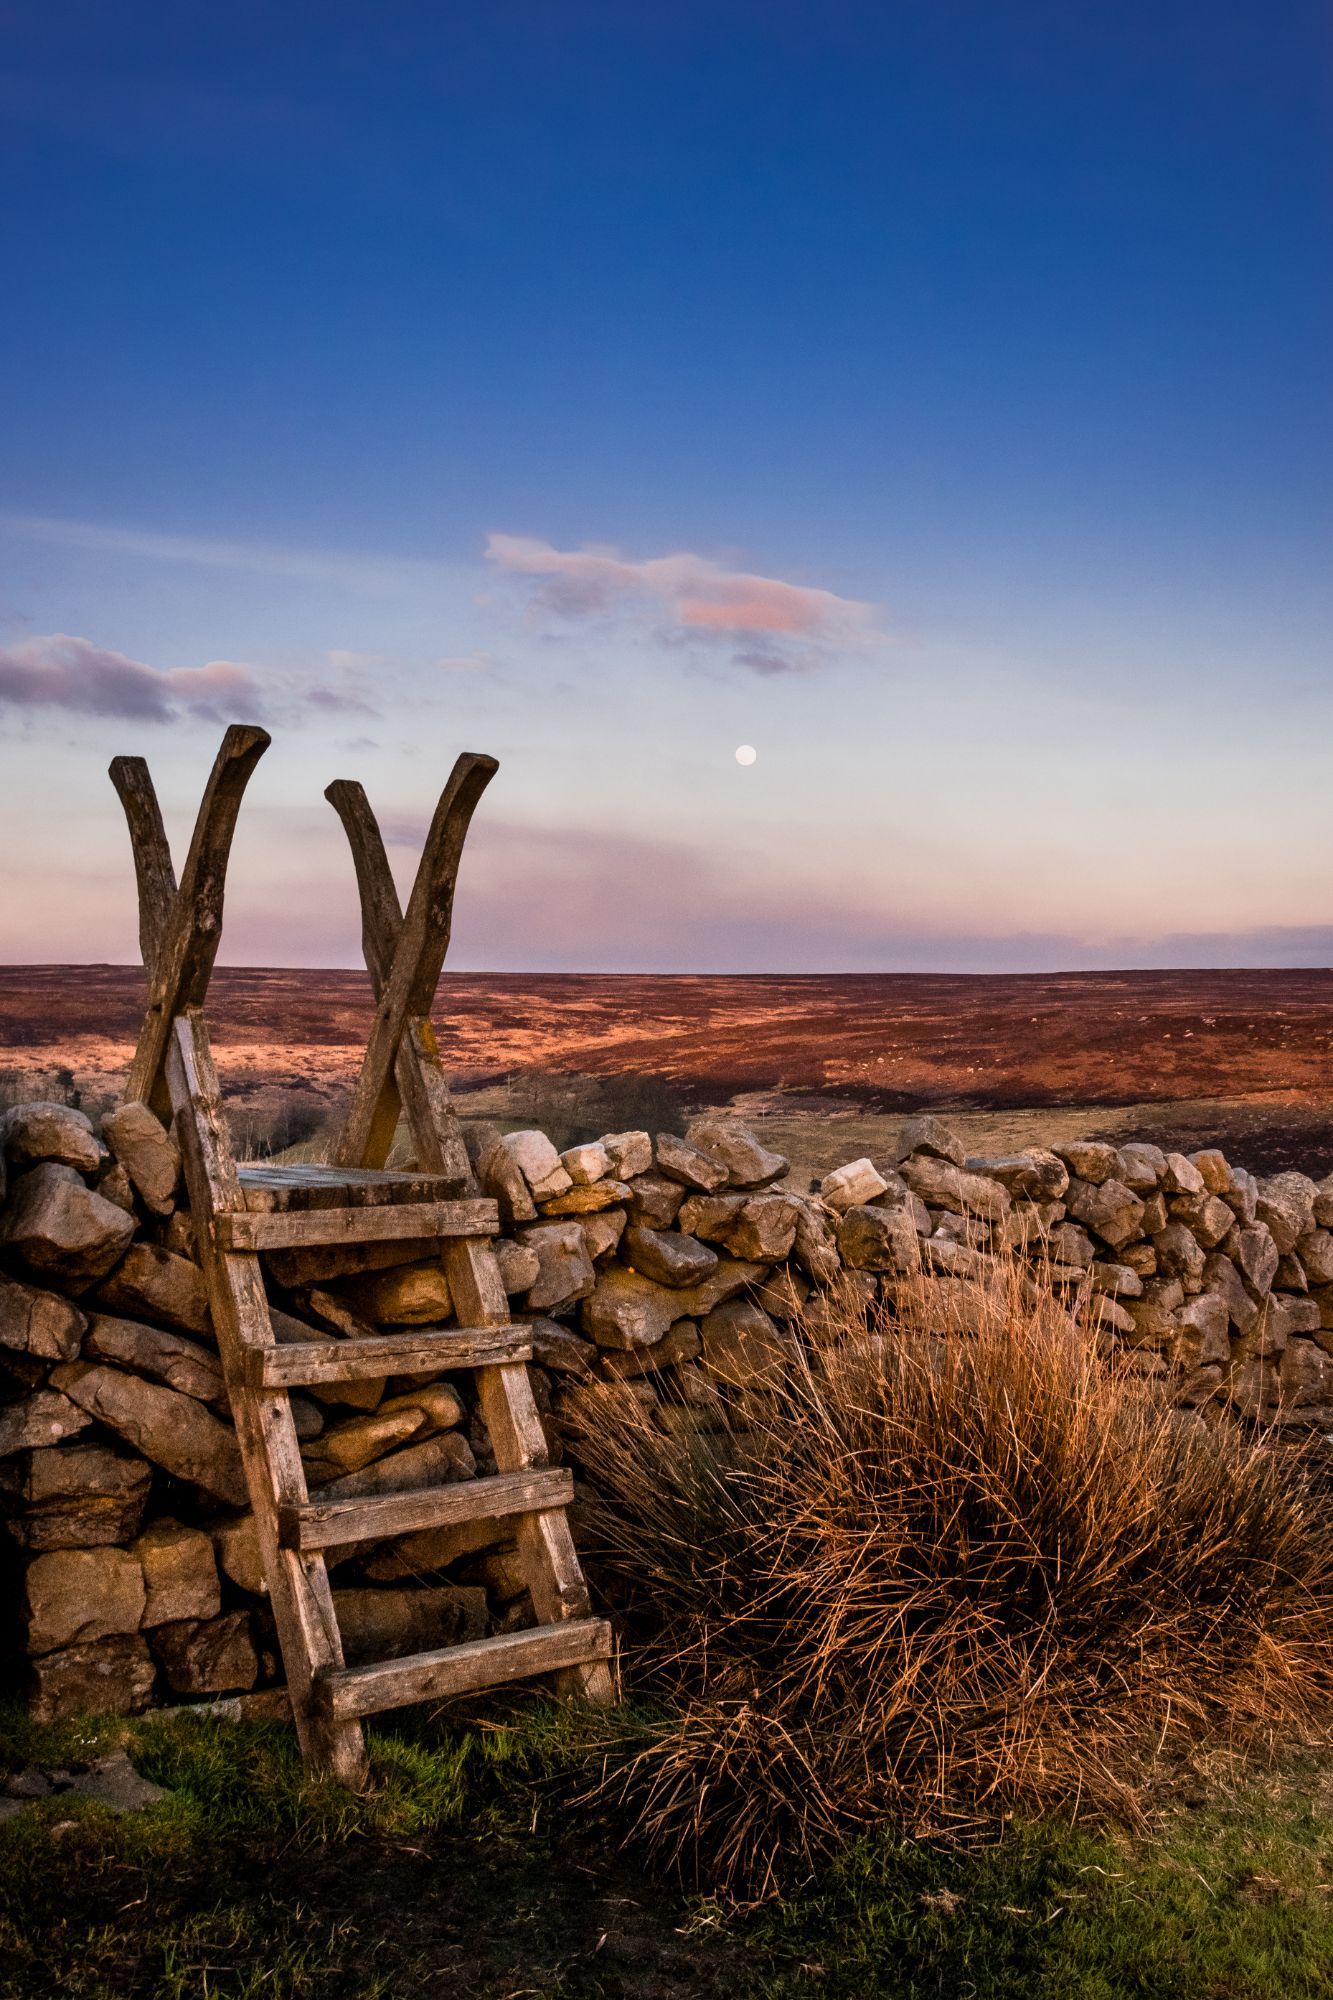 A wooden stile is photographed at the golden hour sunset. The moon is out and everywhere looks golden.